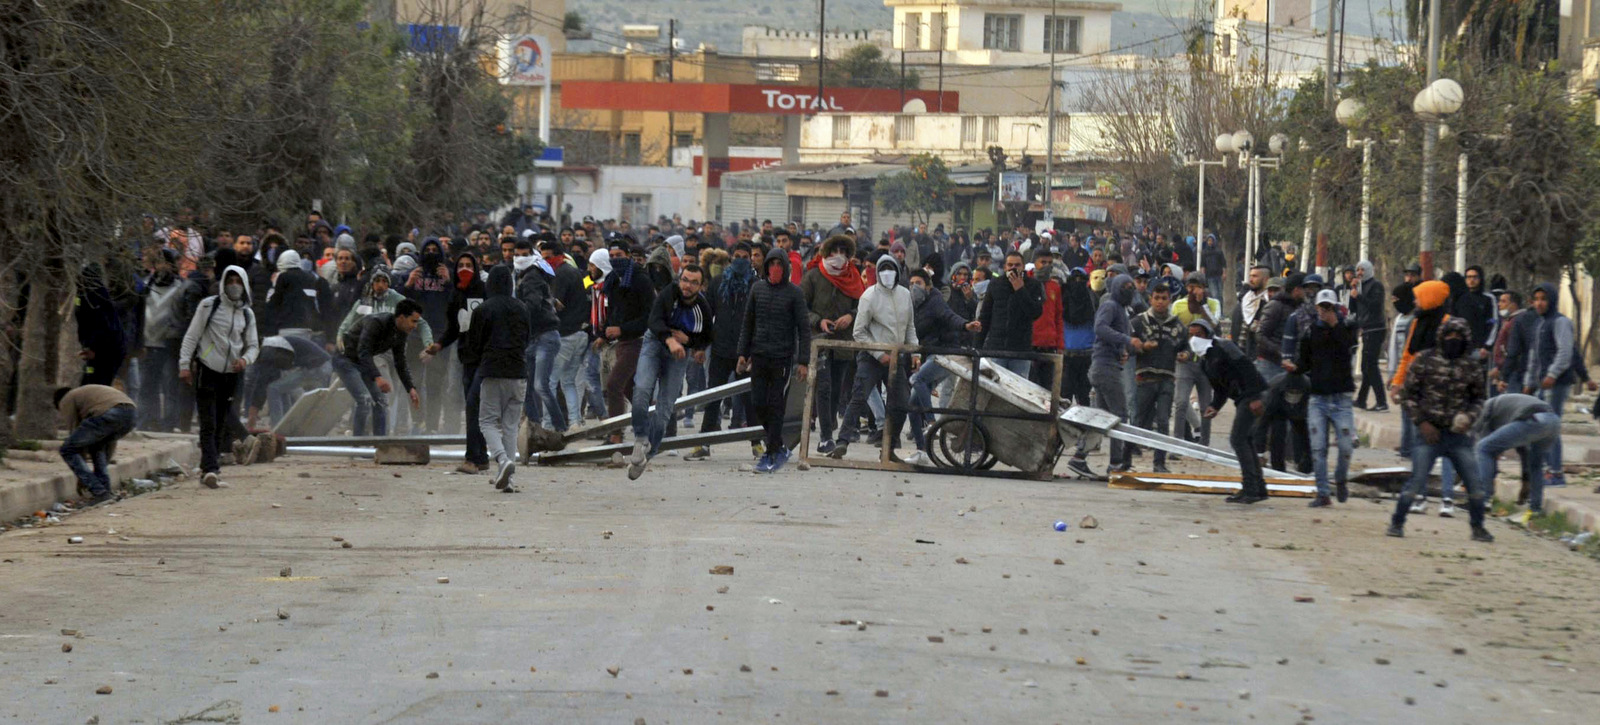 Protesters take the streets during anti-government protests, in Tebourba, south of the Tunisian capital, Tunis, Jan. 9, 2018. Tunisia's prime minister promised to crack down on rioters after violent protests over price hikes raised fears of broader unrest in the country that was the birthplace of the Arab Spring. (AP/Anis Ben Ali)